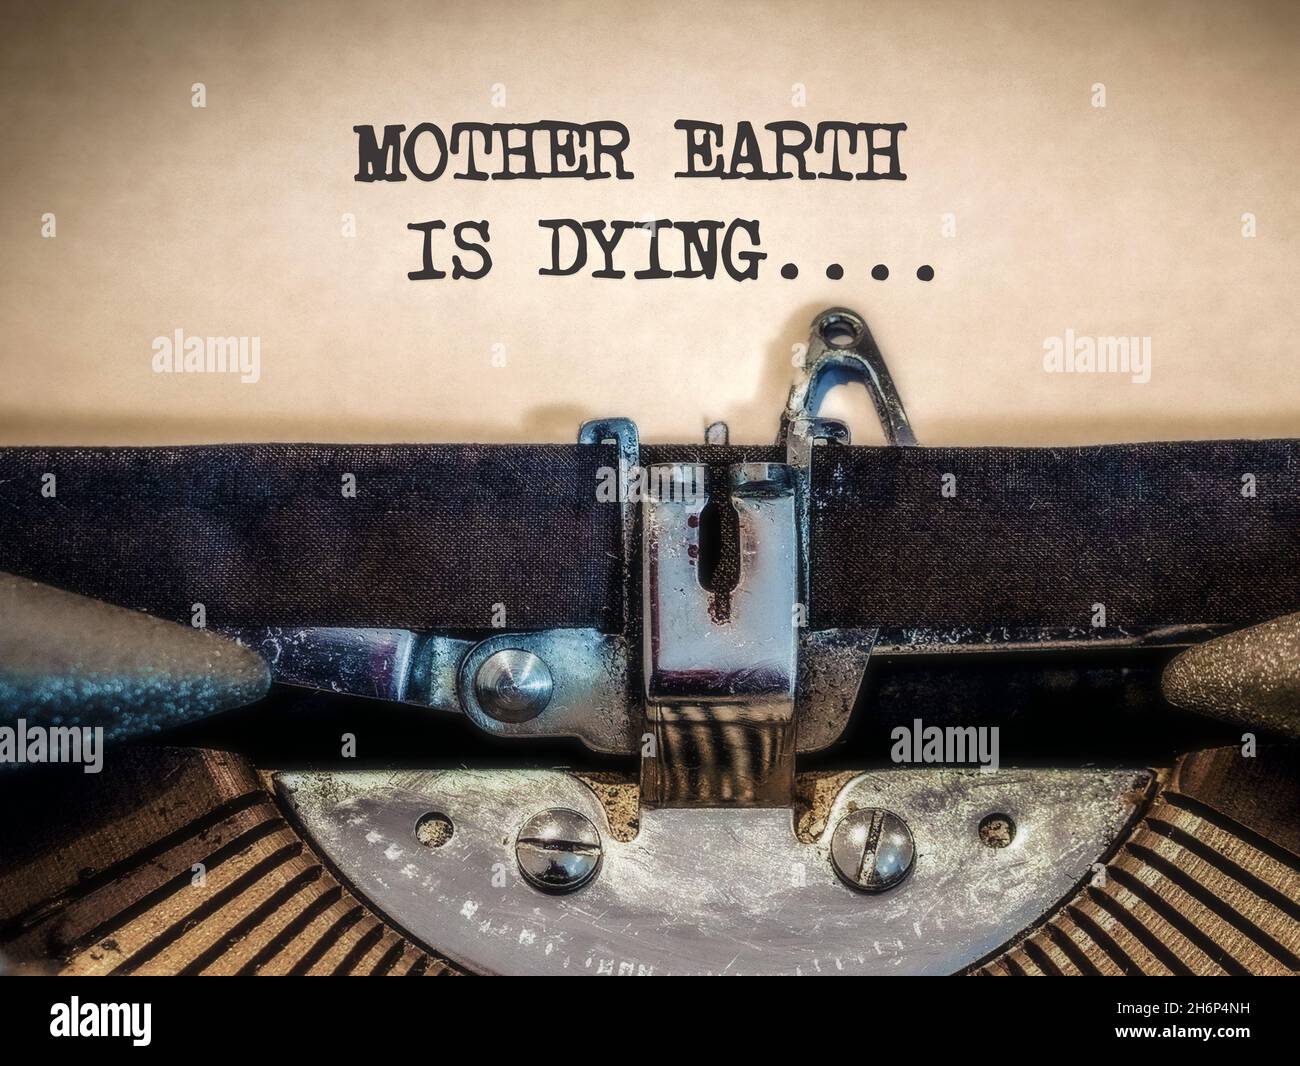 Vintage typewriter displaying Mother earth is dying Stock Photo